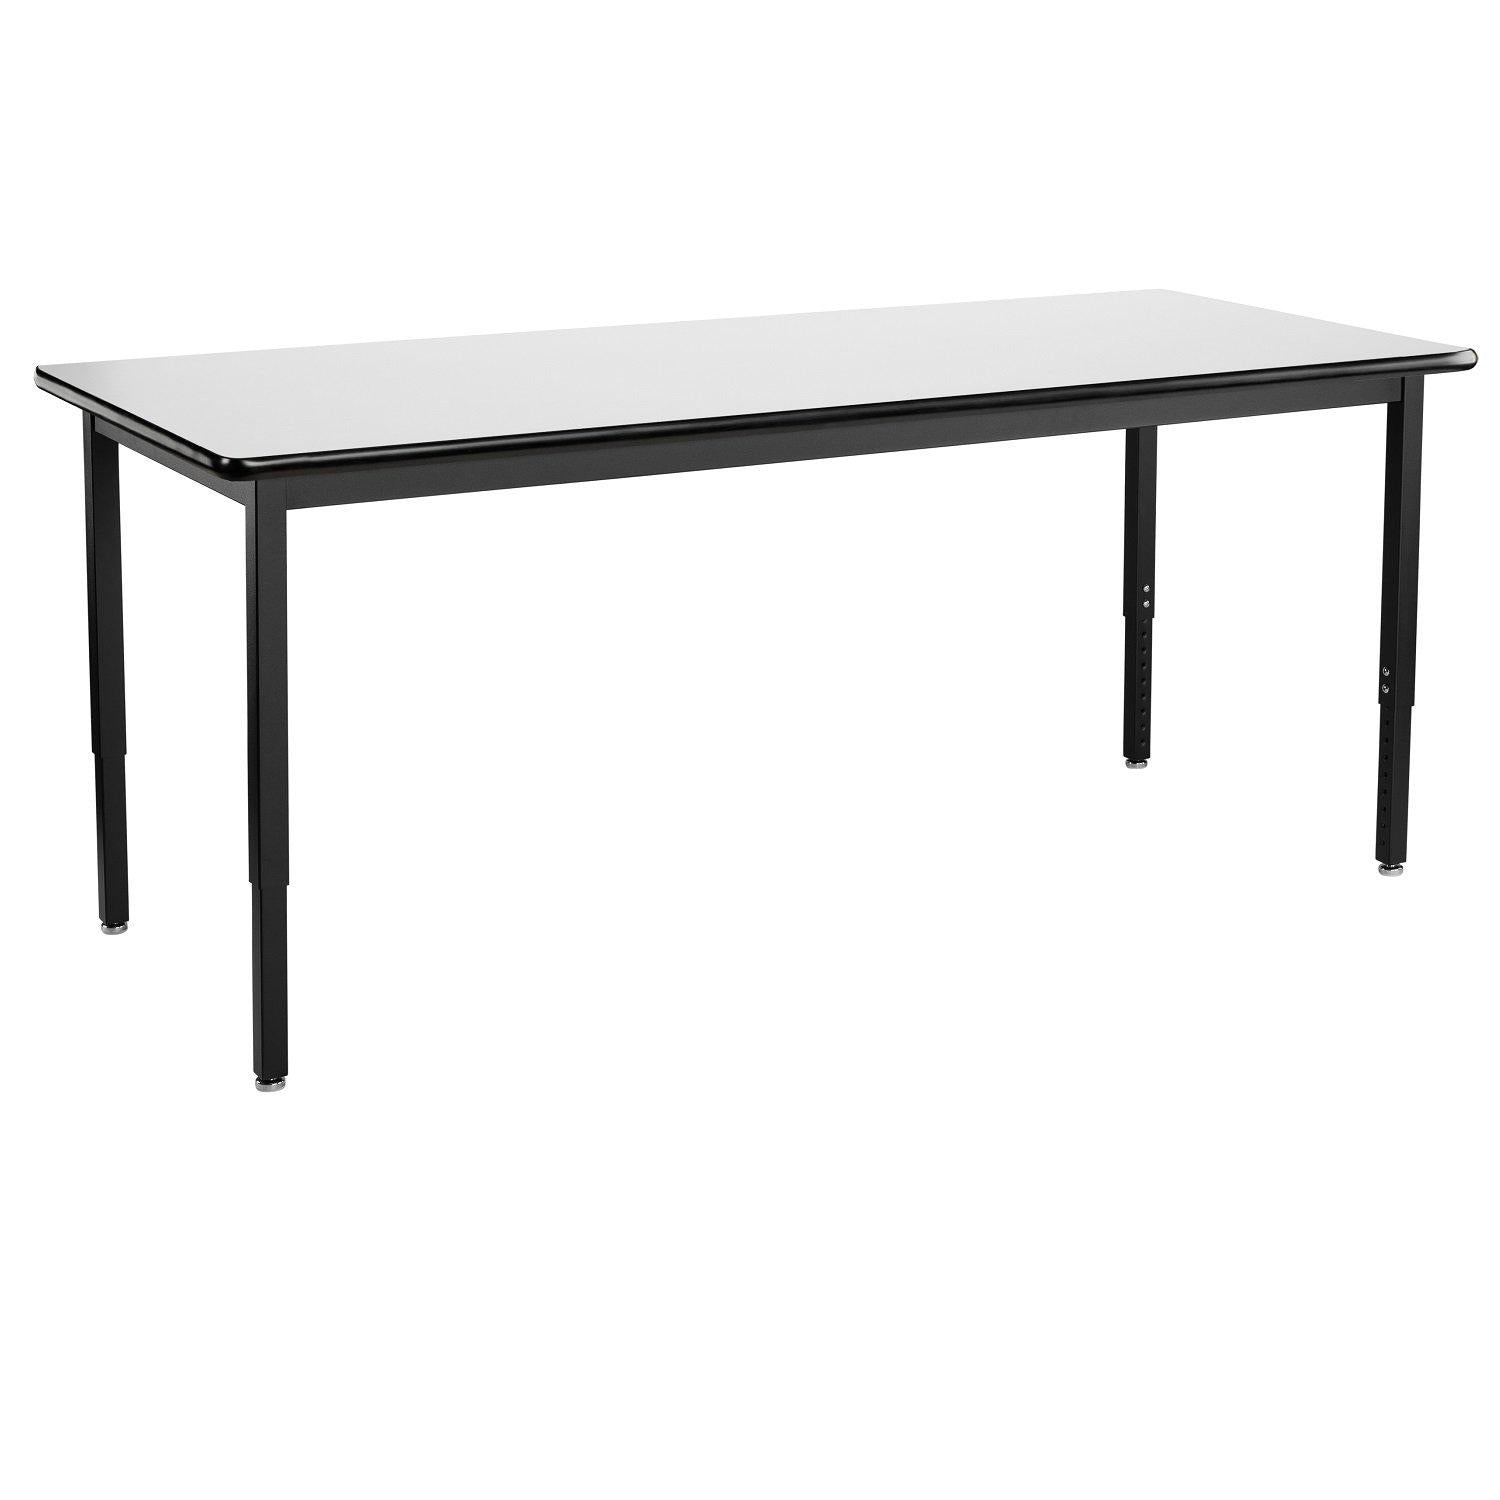 Heavy-Duty Height-Adjustable Utility Table, Black Frame, 24" x 84", Whiteboard High-Pressure Laminate Top